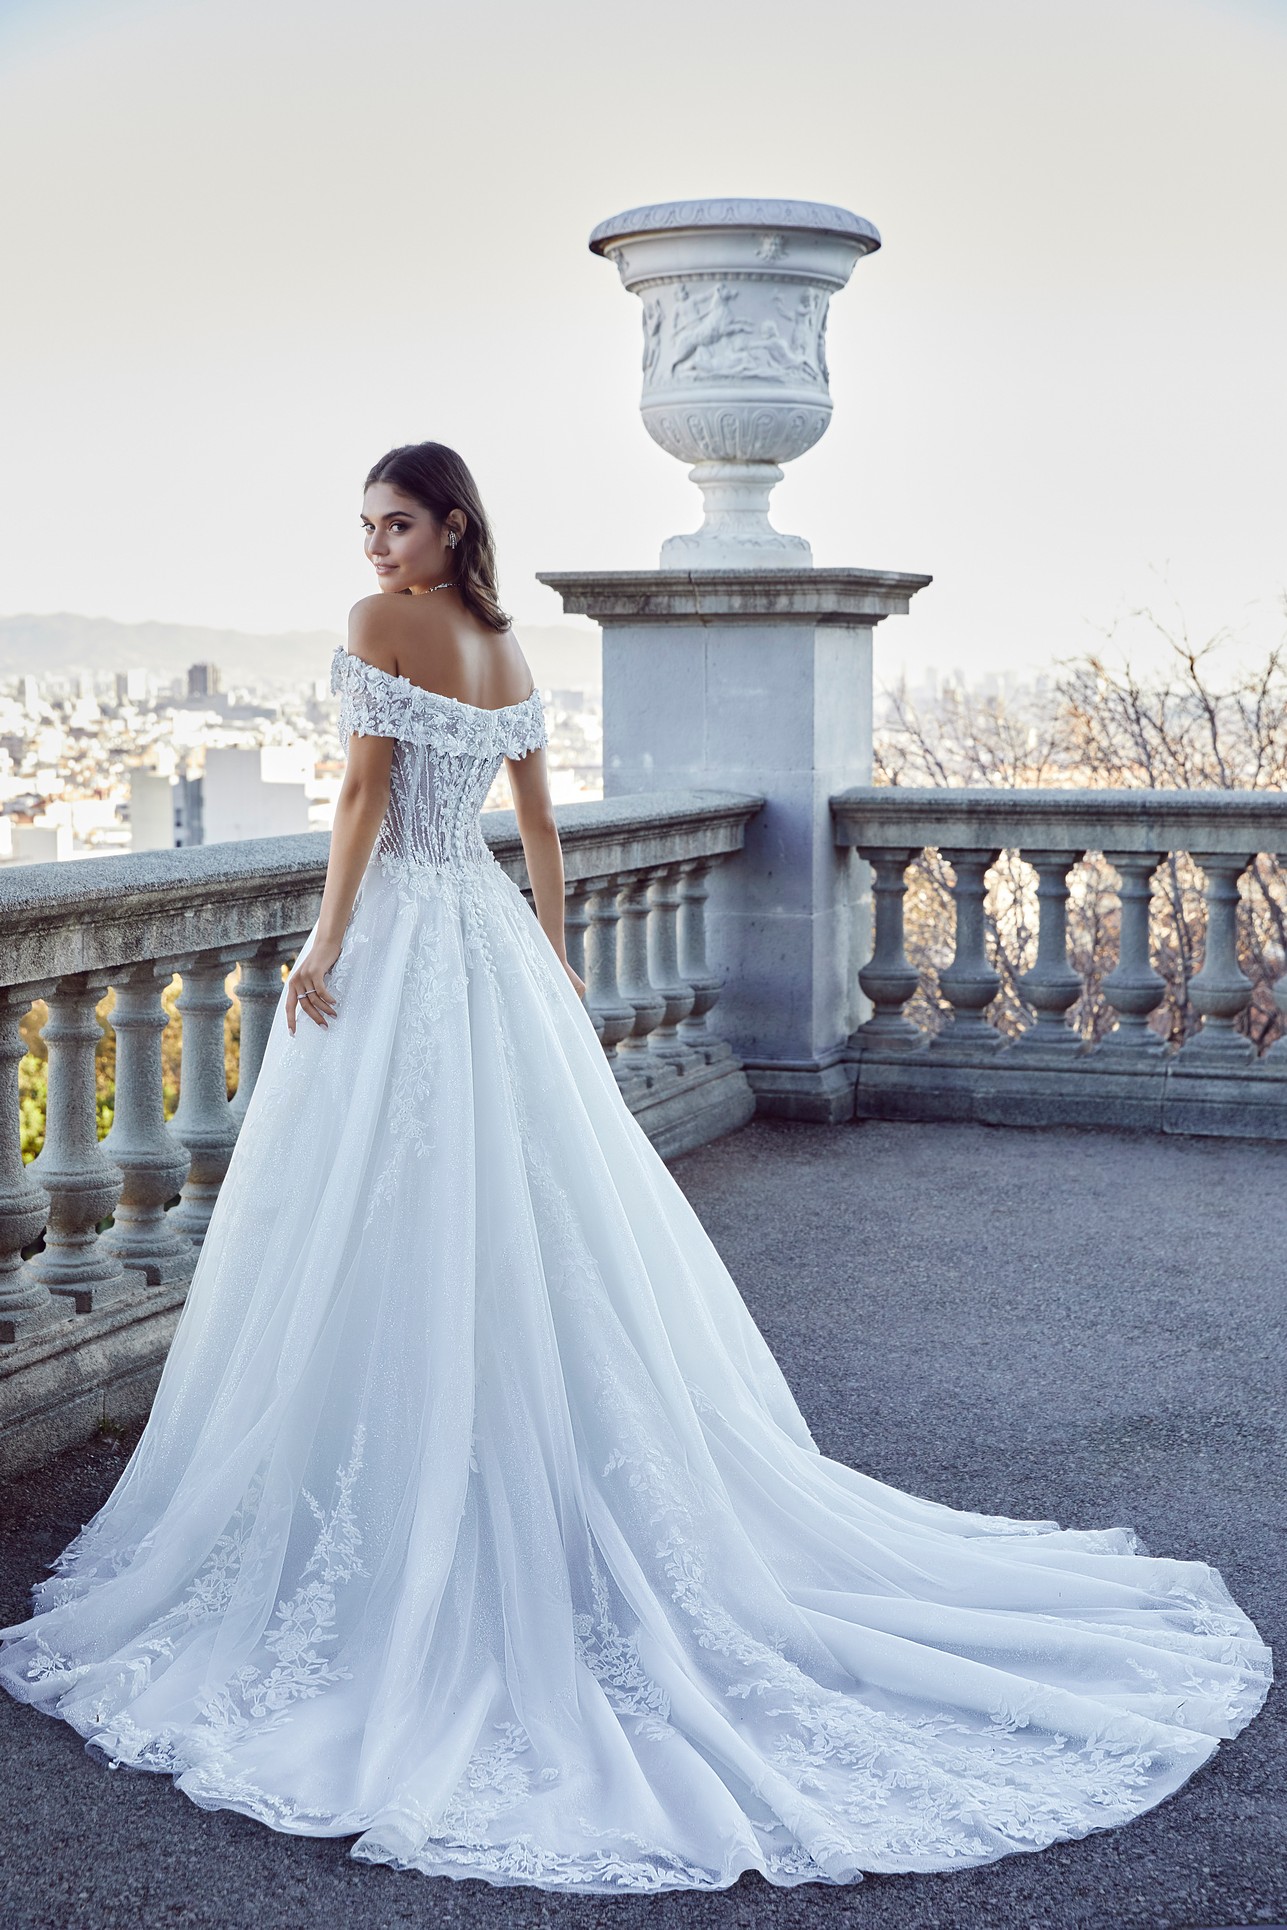 Back image of woman in white ballgown dress standing in front of city view 